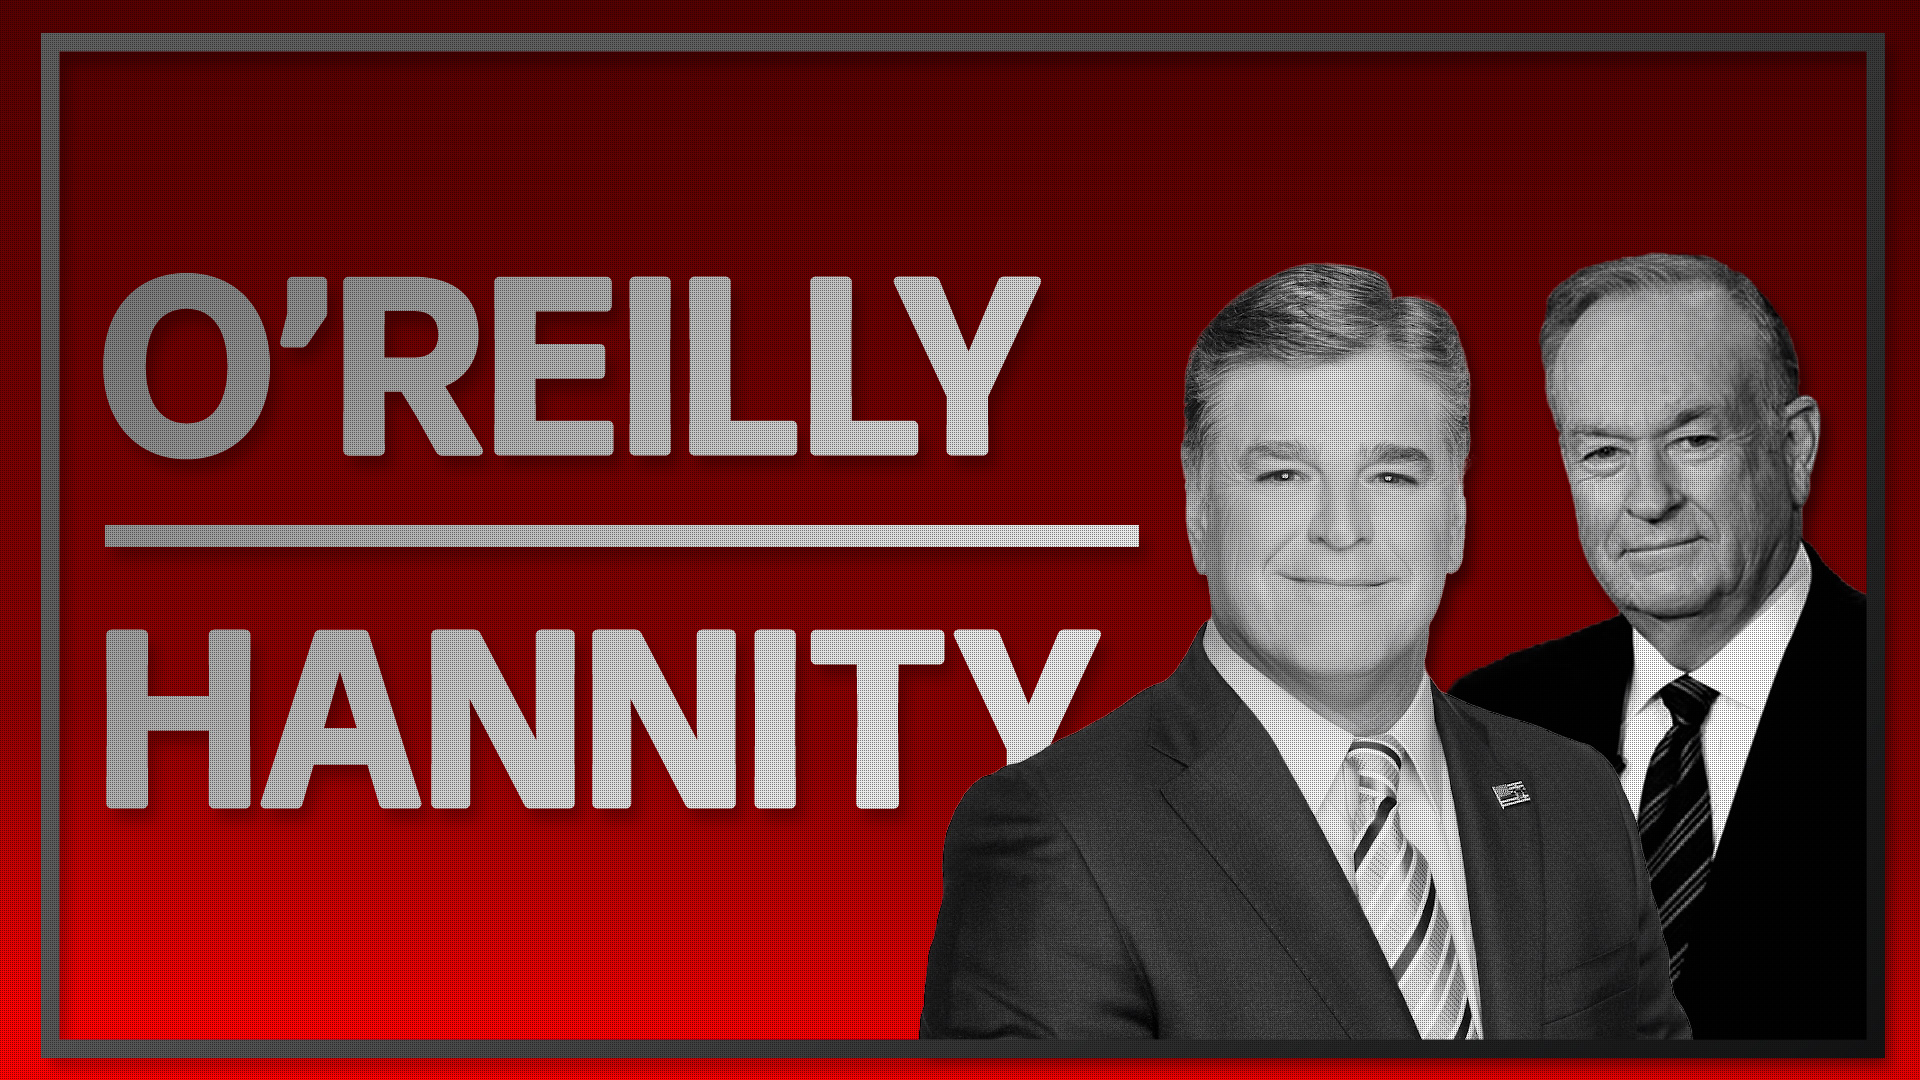 Listen: O'Reilly and Hannity on Democrat Lawmakers and the 'Blood on Their Hands'